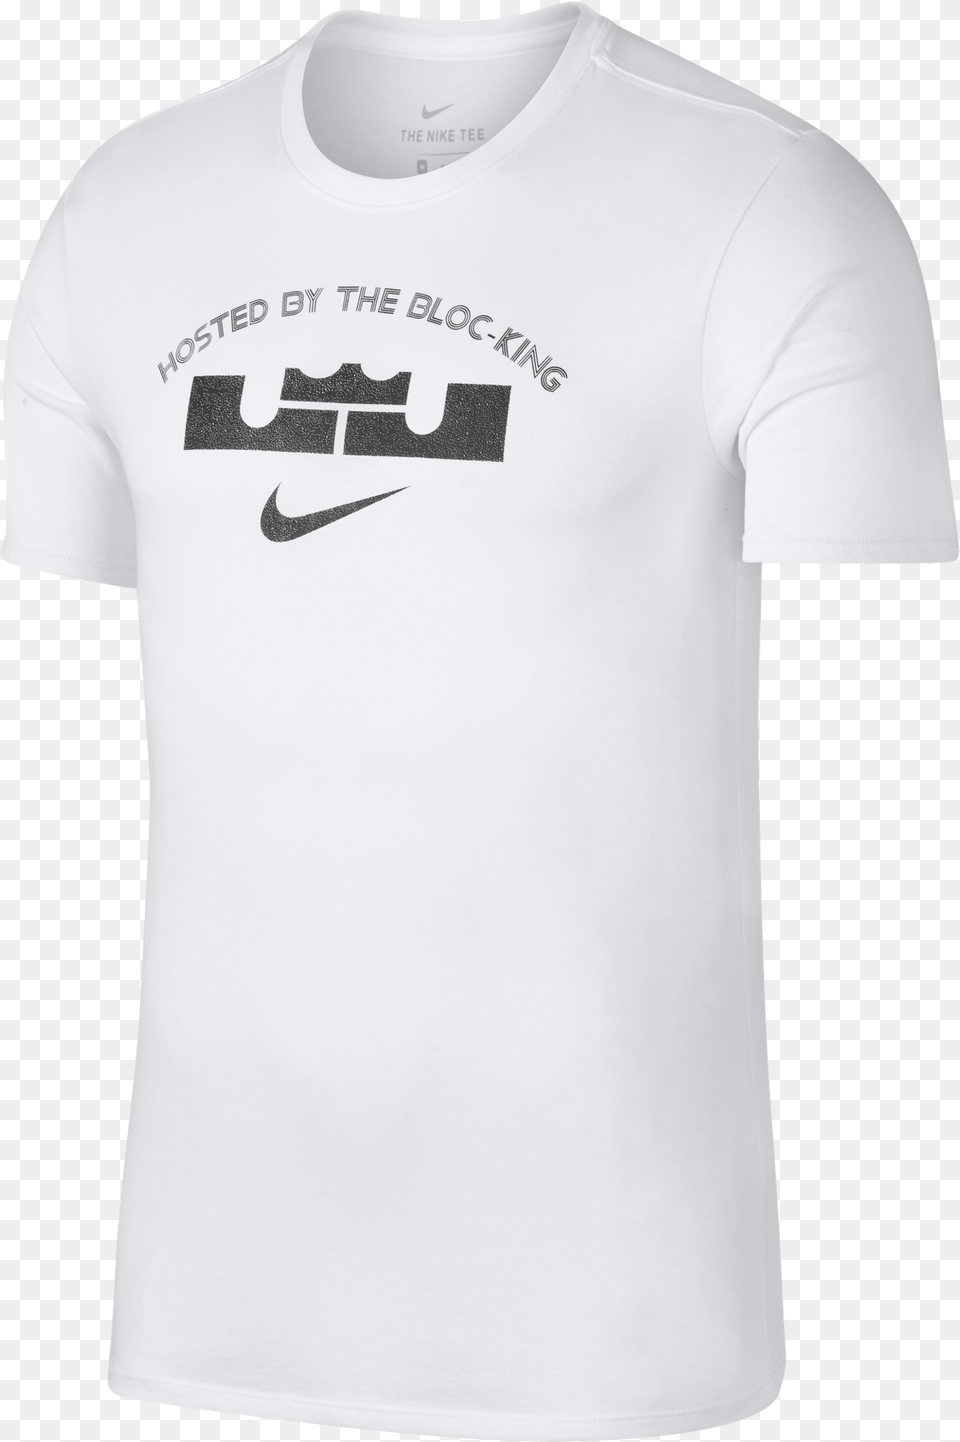 Nike Lebron James Block Party Dry Tee White Gucci T Shirt, Clothing, T-shirt Free Transparent Png